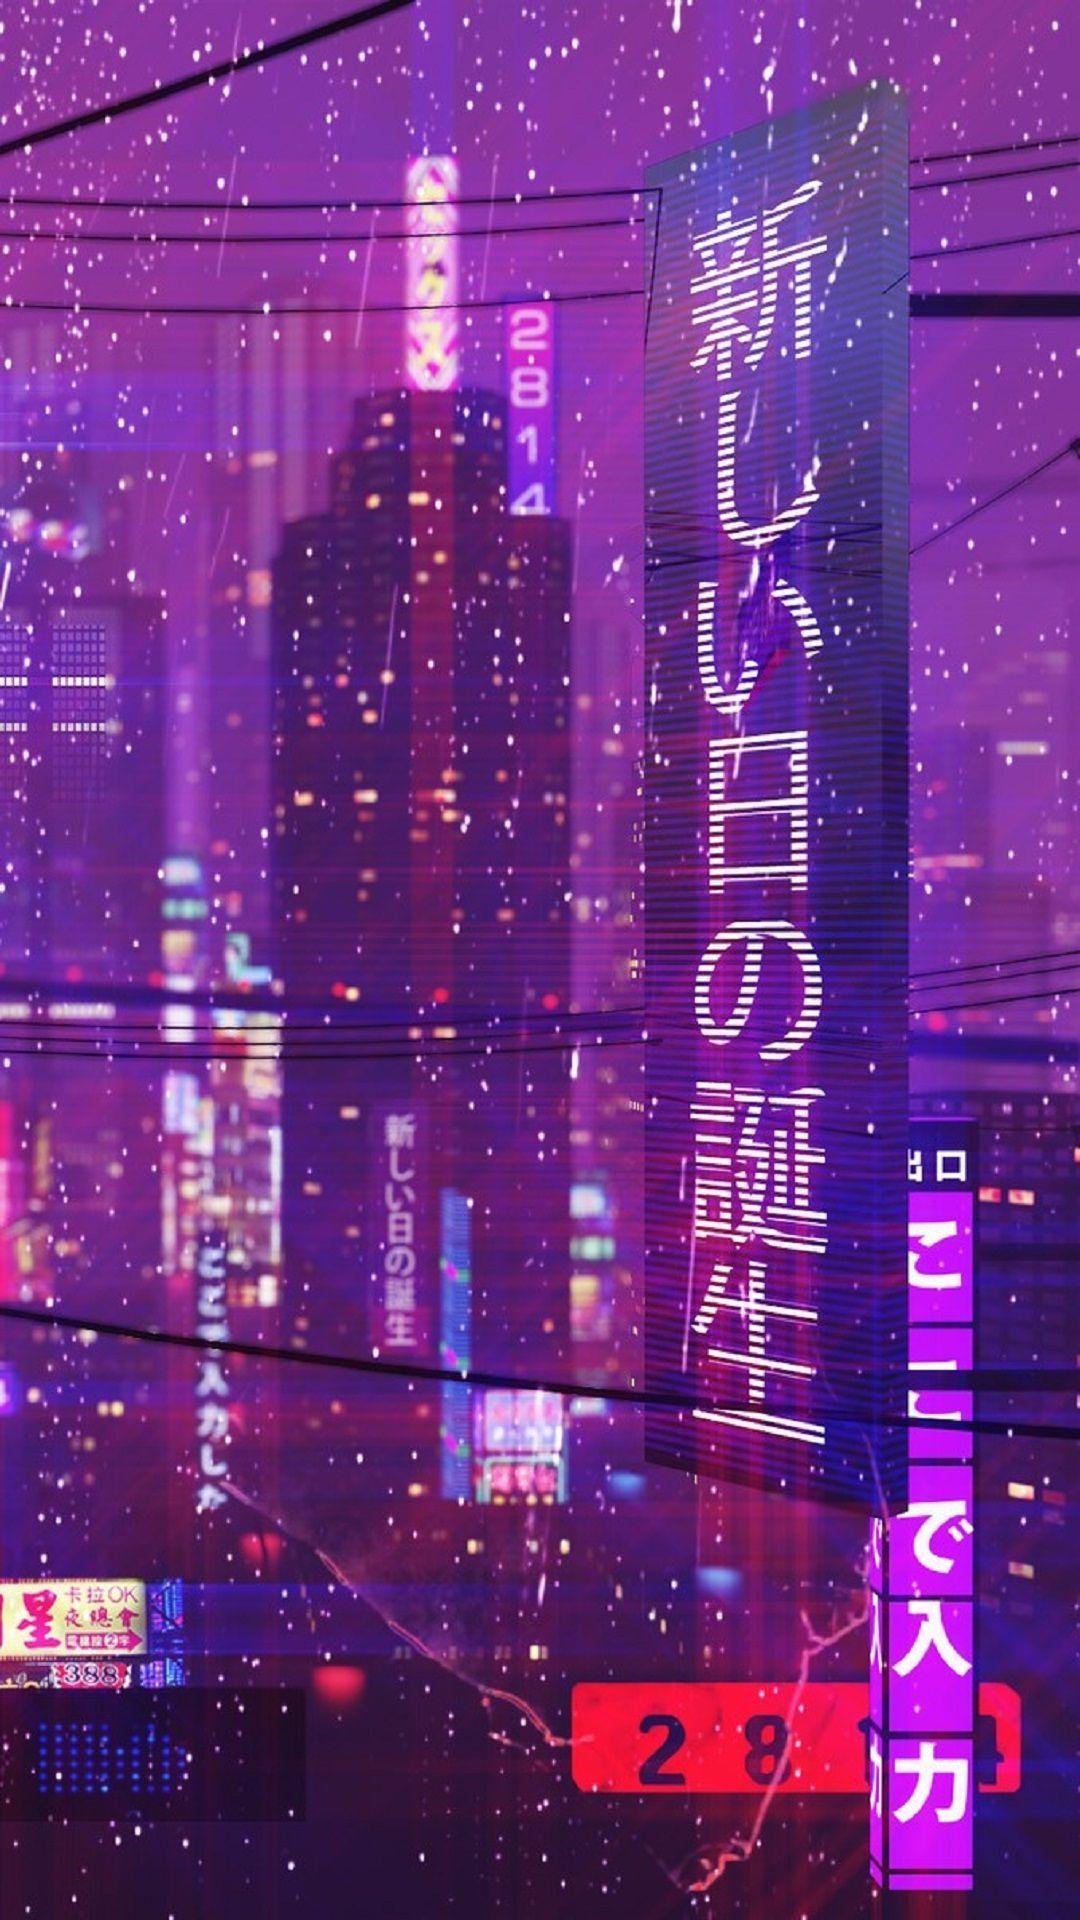 80s Aesthetic Wallpaper (image in Collection)